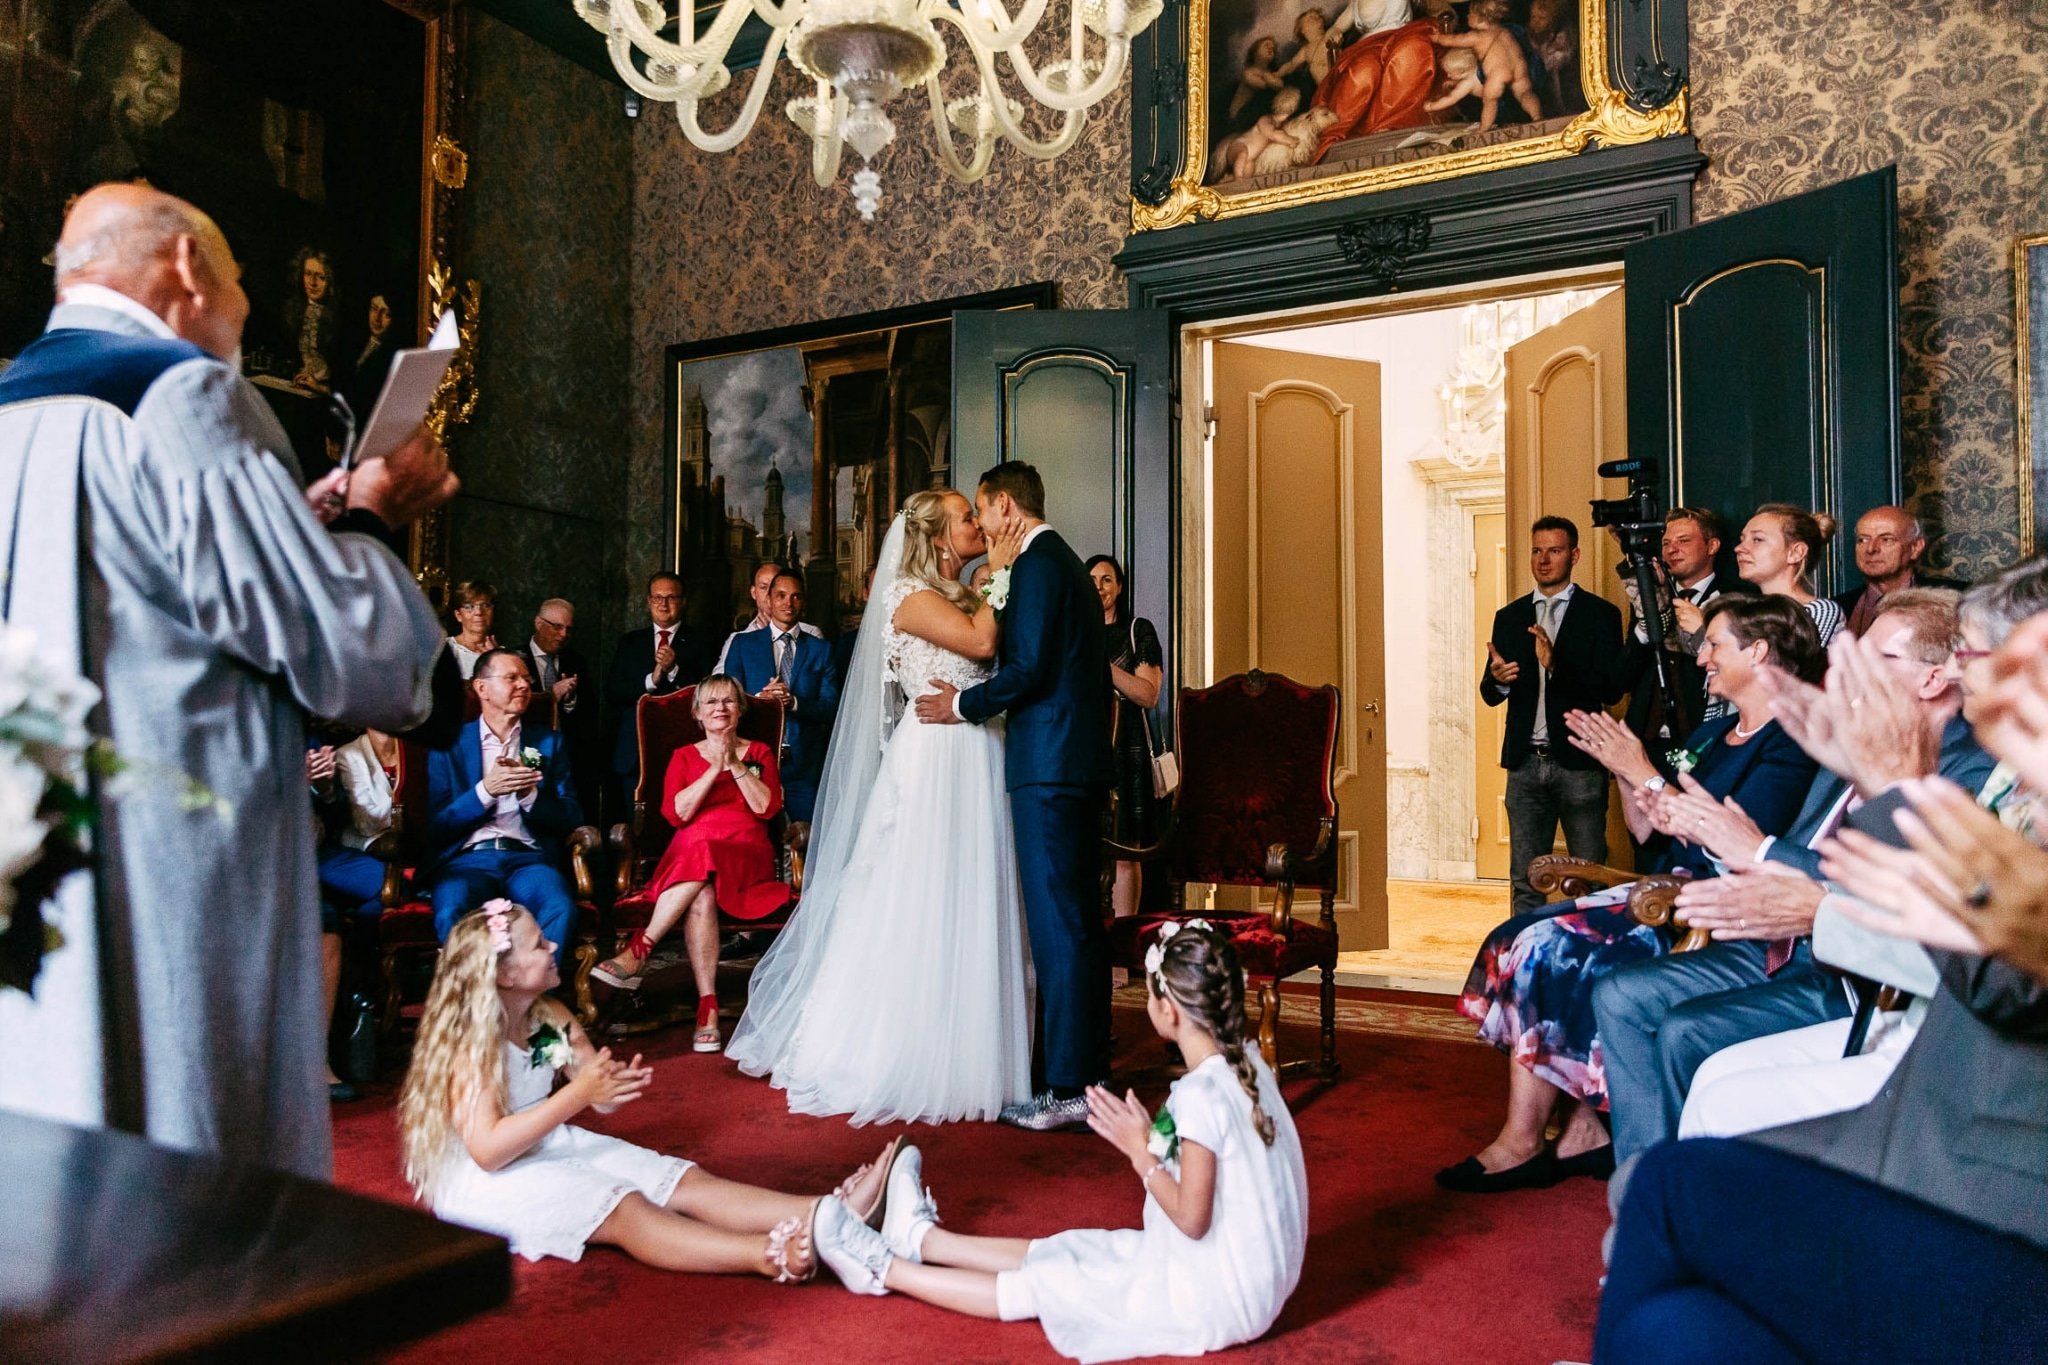 A wedding ceremony in an ornate room with a kissing bride and groom.